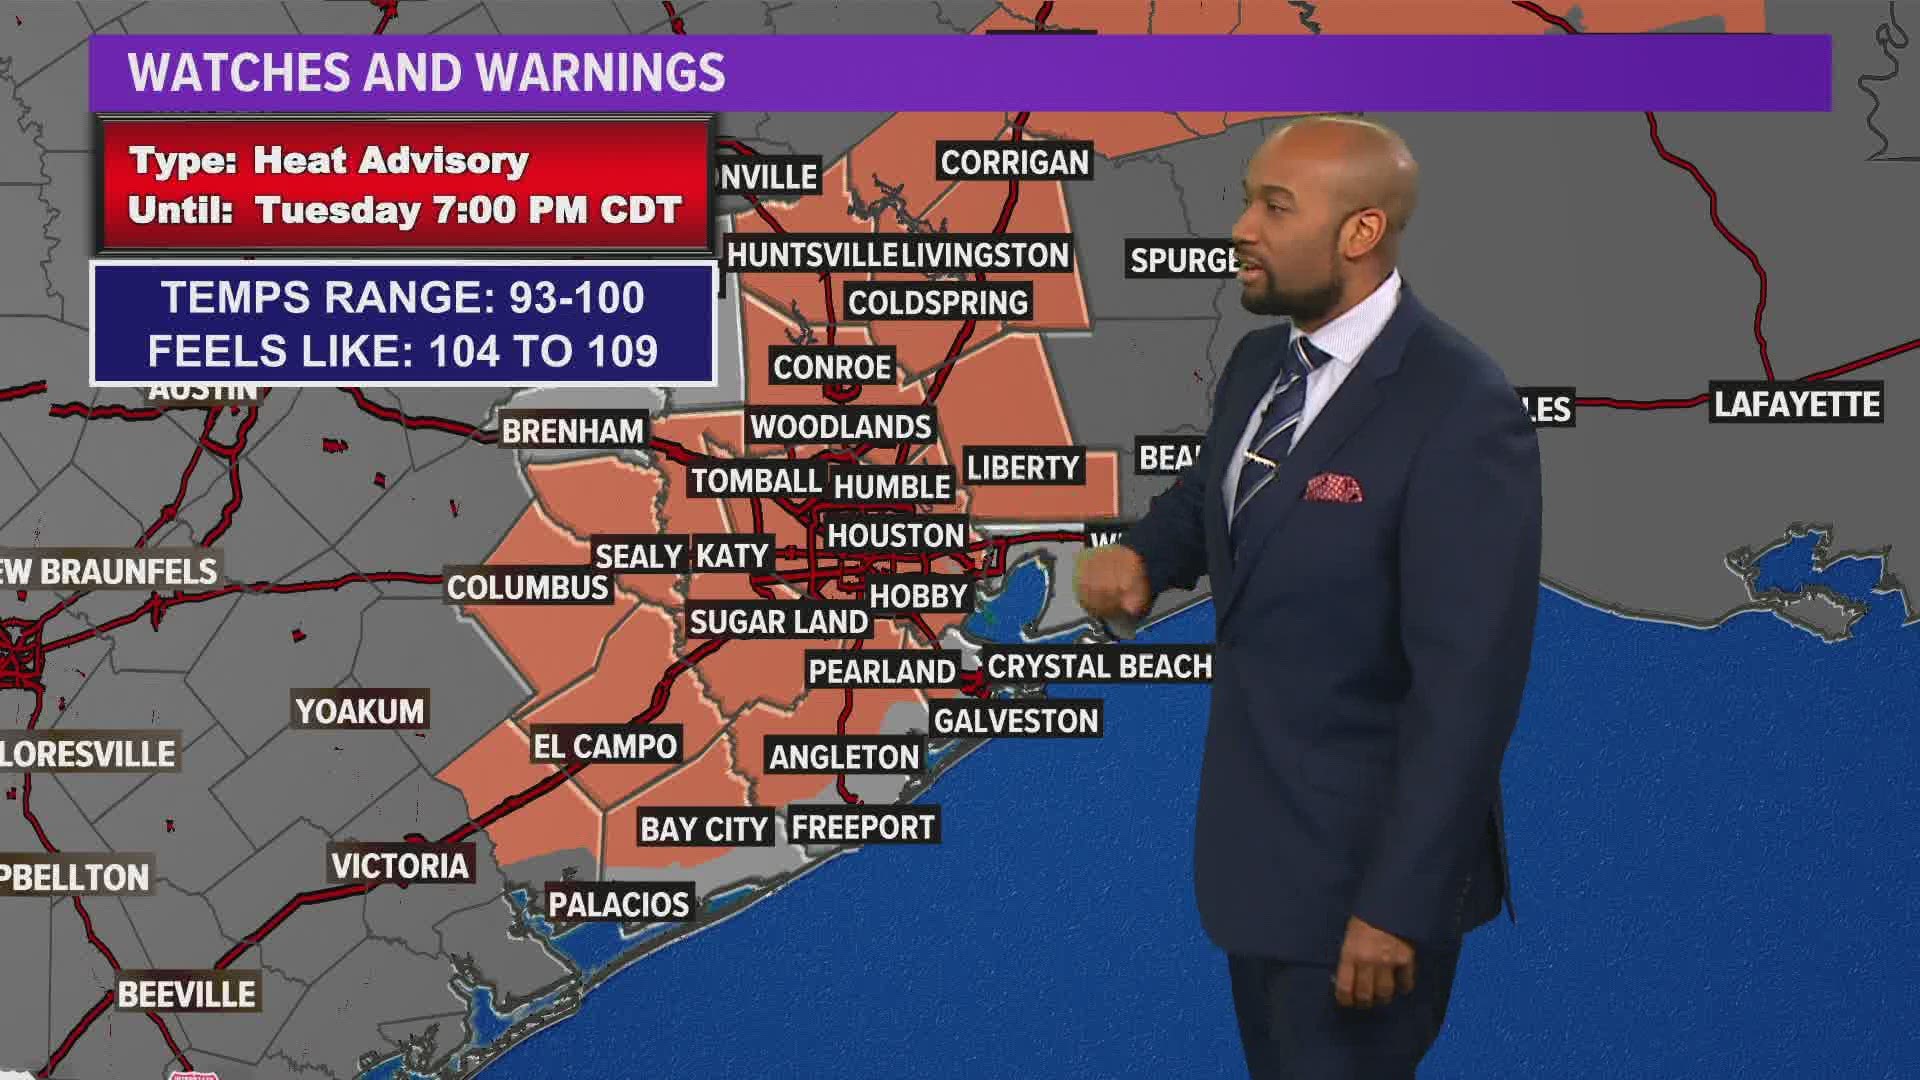 You might see some storms pop up in the Houston area this evening, but the heat will continue, says KHOU 11 Meteorologist Addison Green.